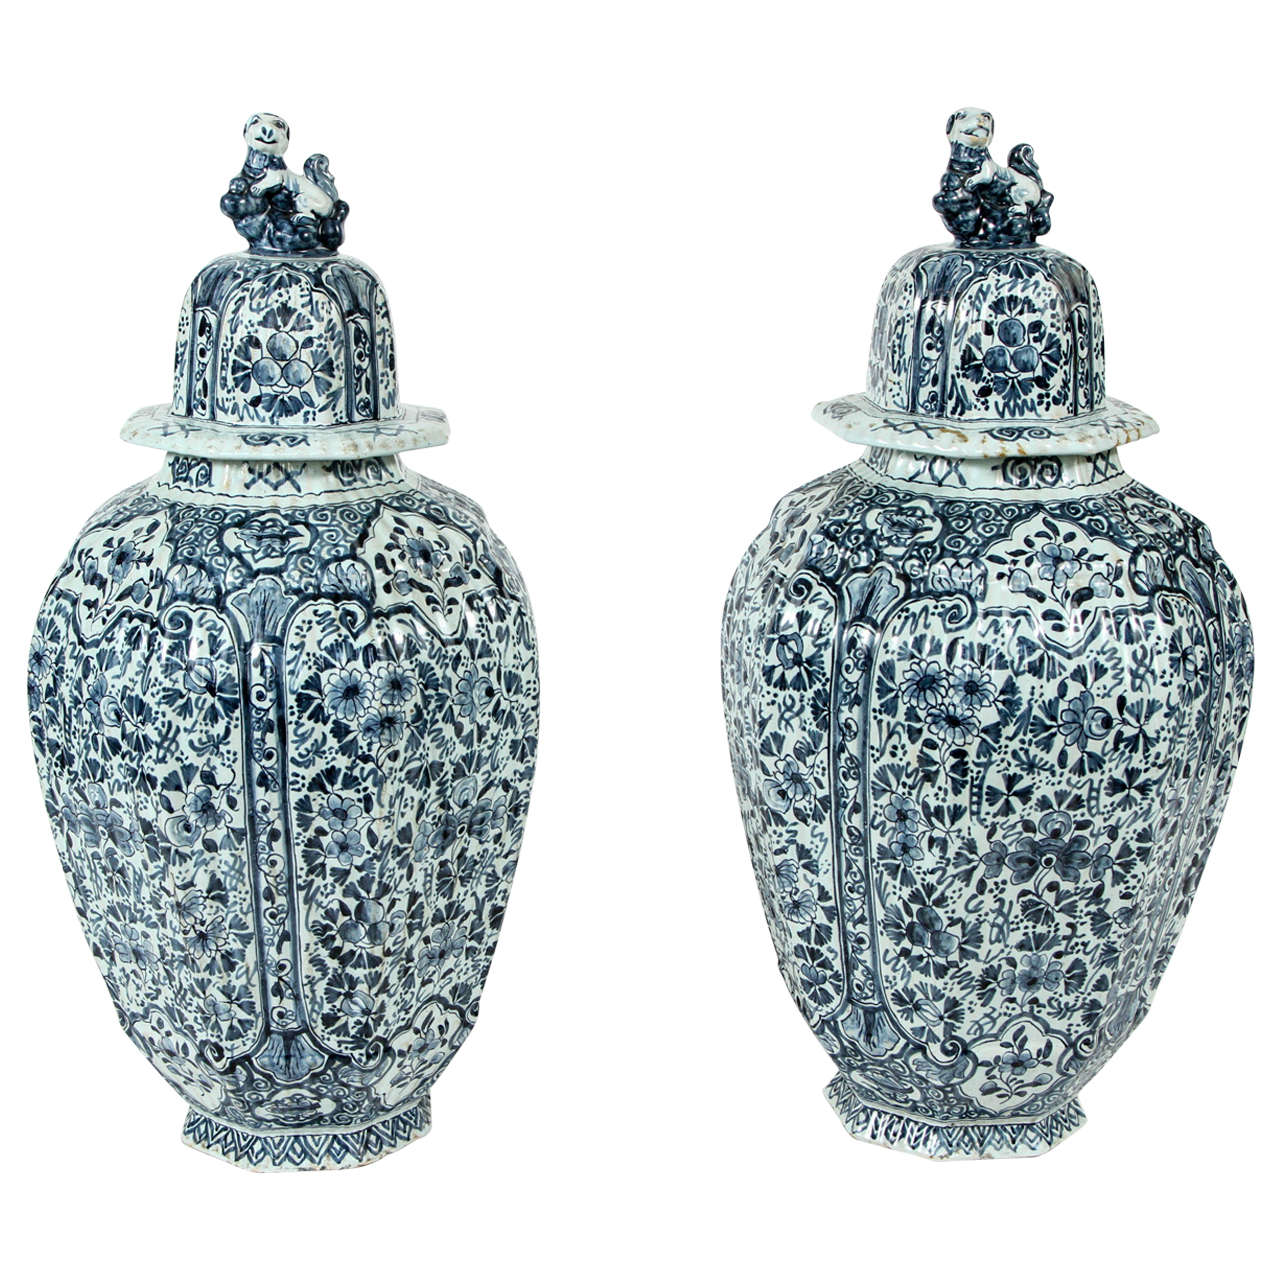 Pair of Large Delft Blue and White Ginger Jars and Covers, circa 1800